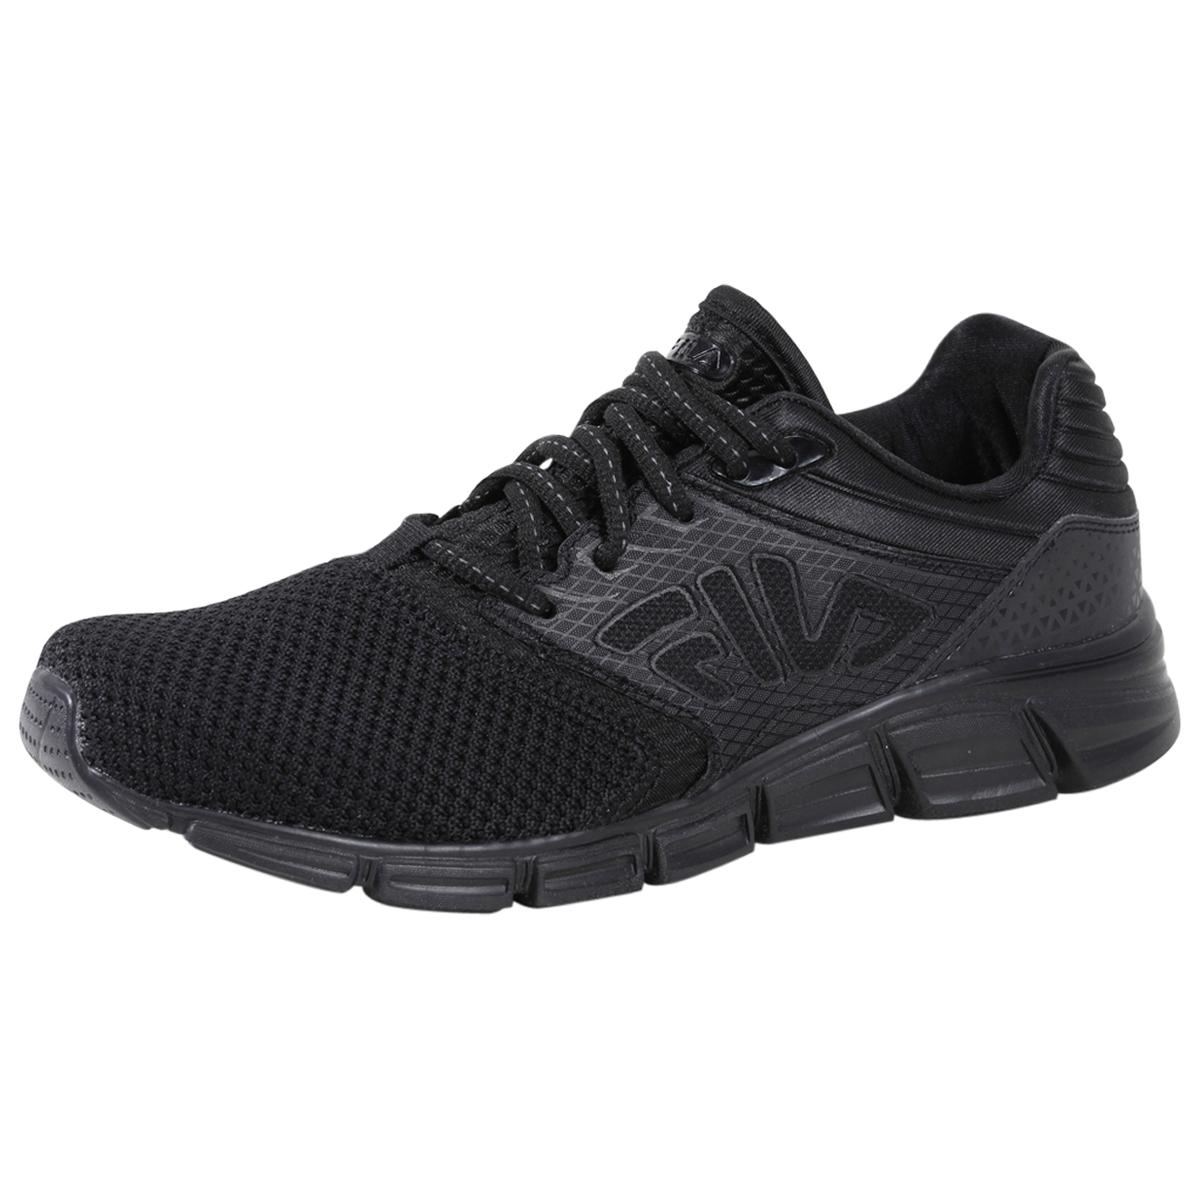 mens running shoes with memory foam